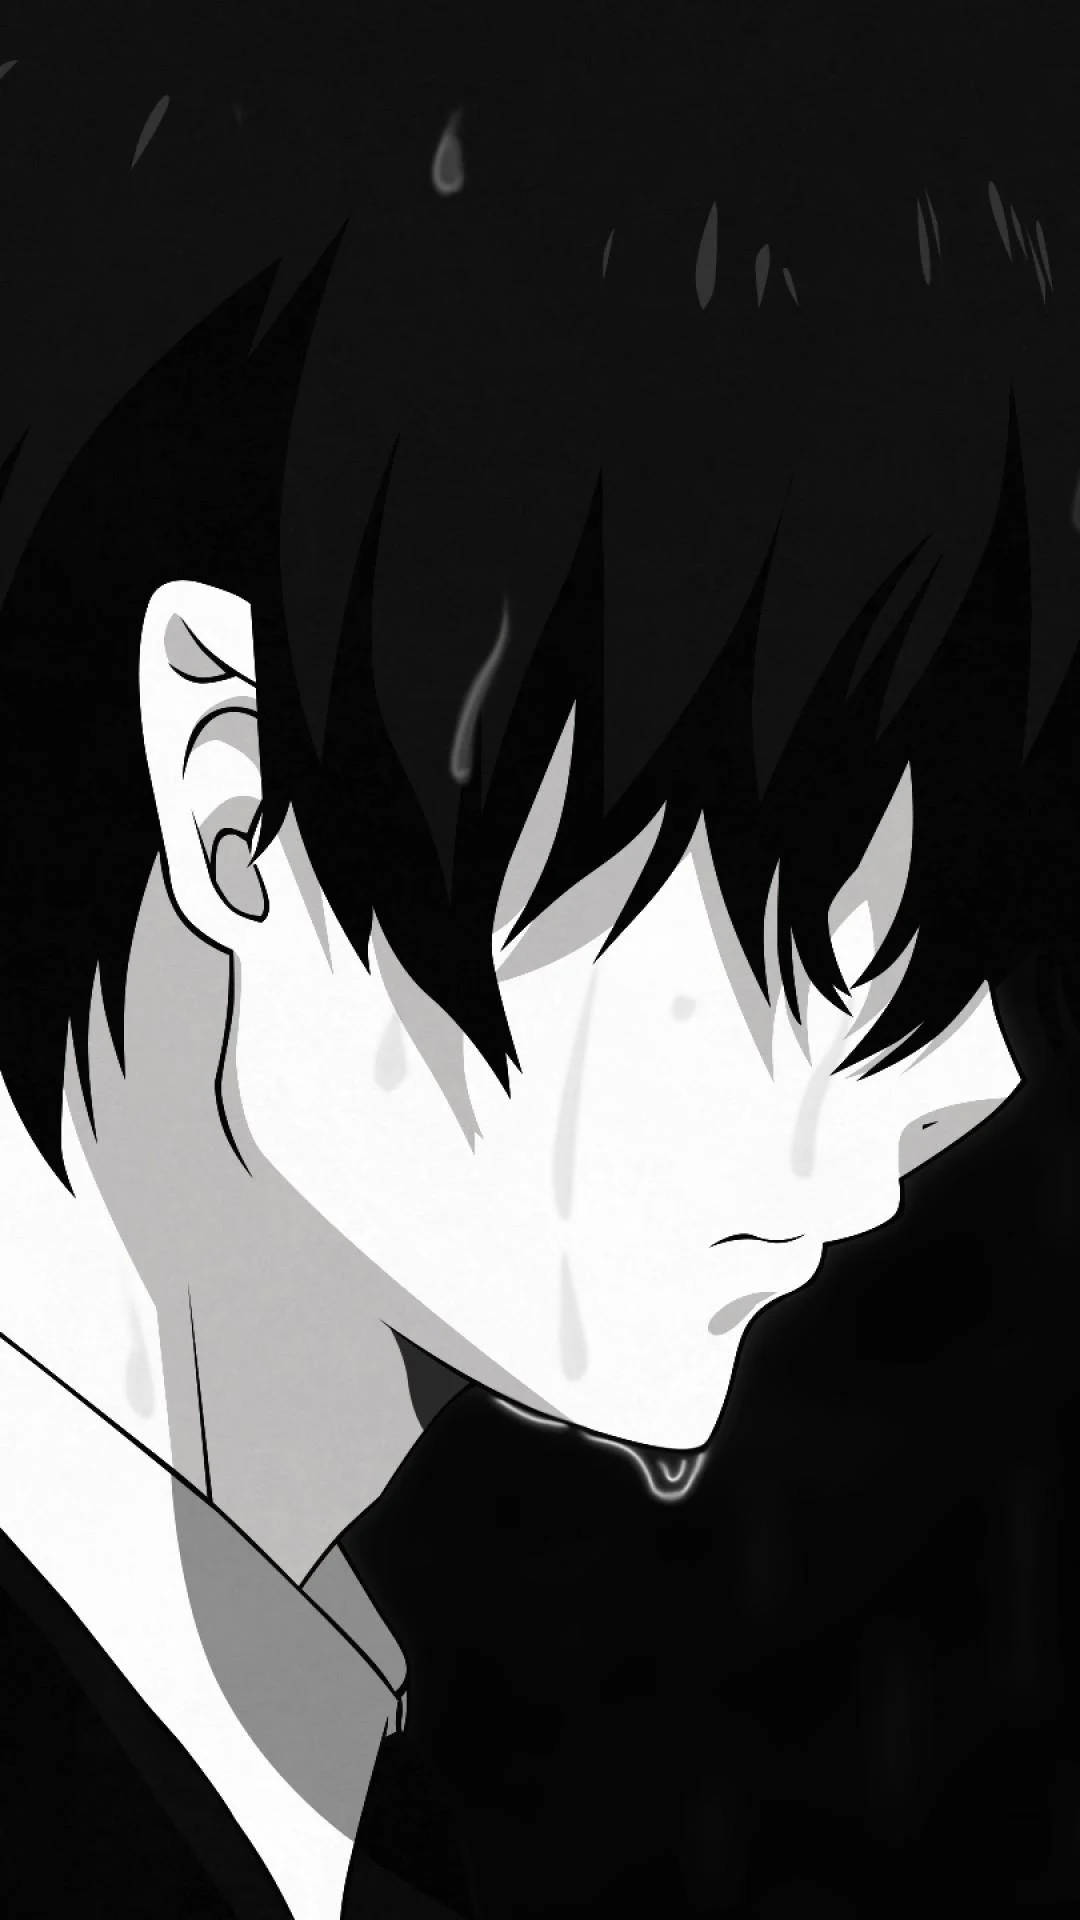 Download Anime Profile Crying Boy Wallpaper 